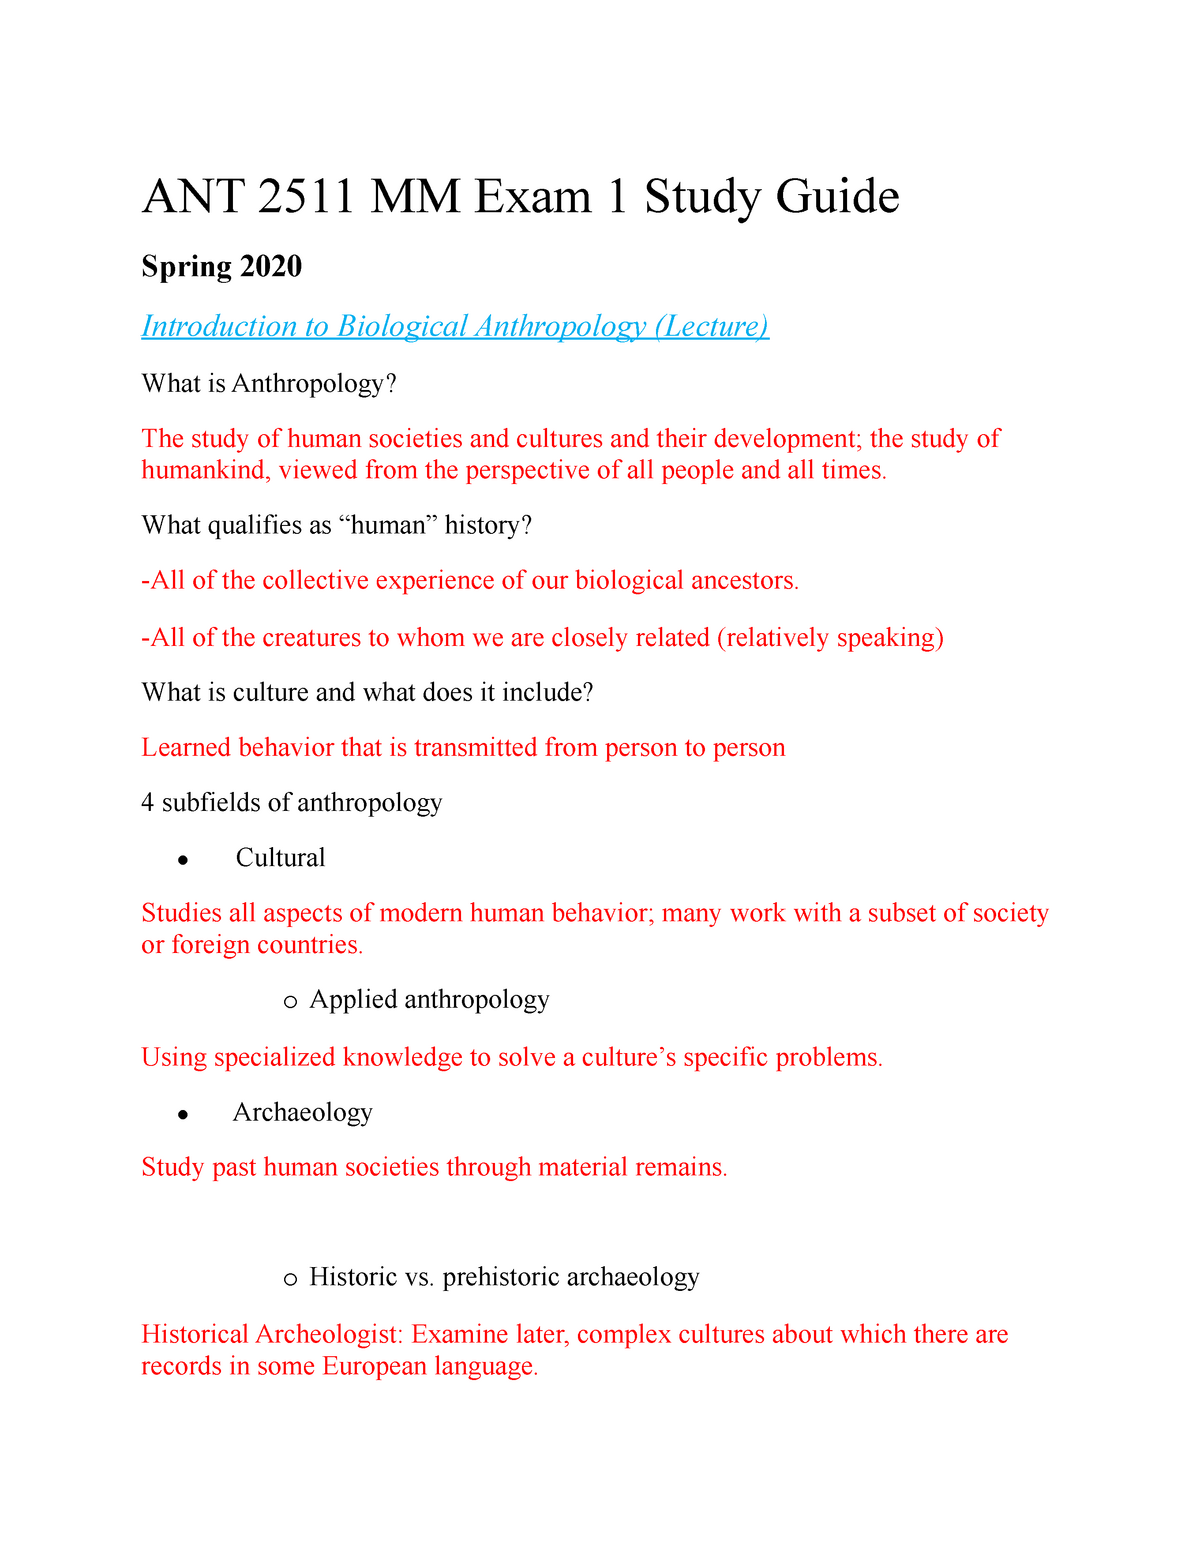 ANT 2511 Exam 1 Study Guide - ANT 2511 MM Exam 1 Study Guide Spring